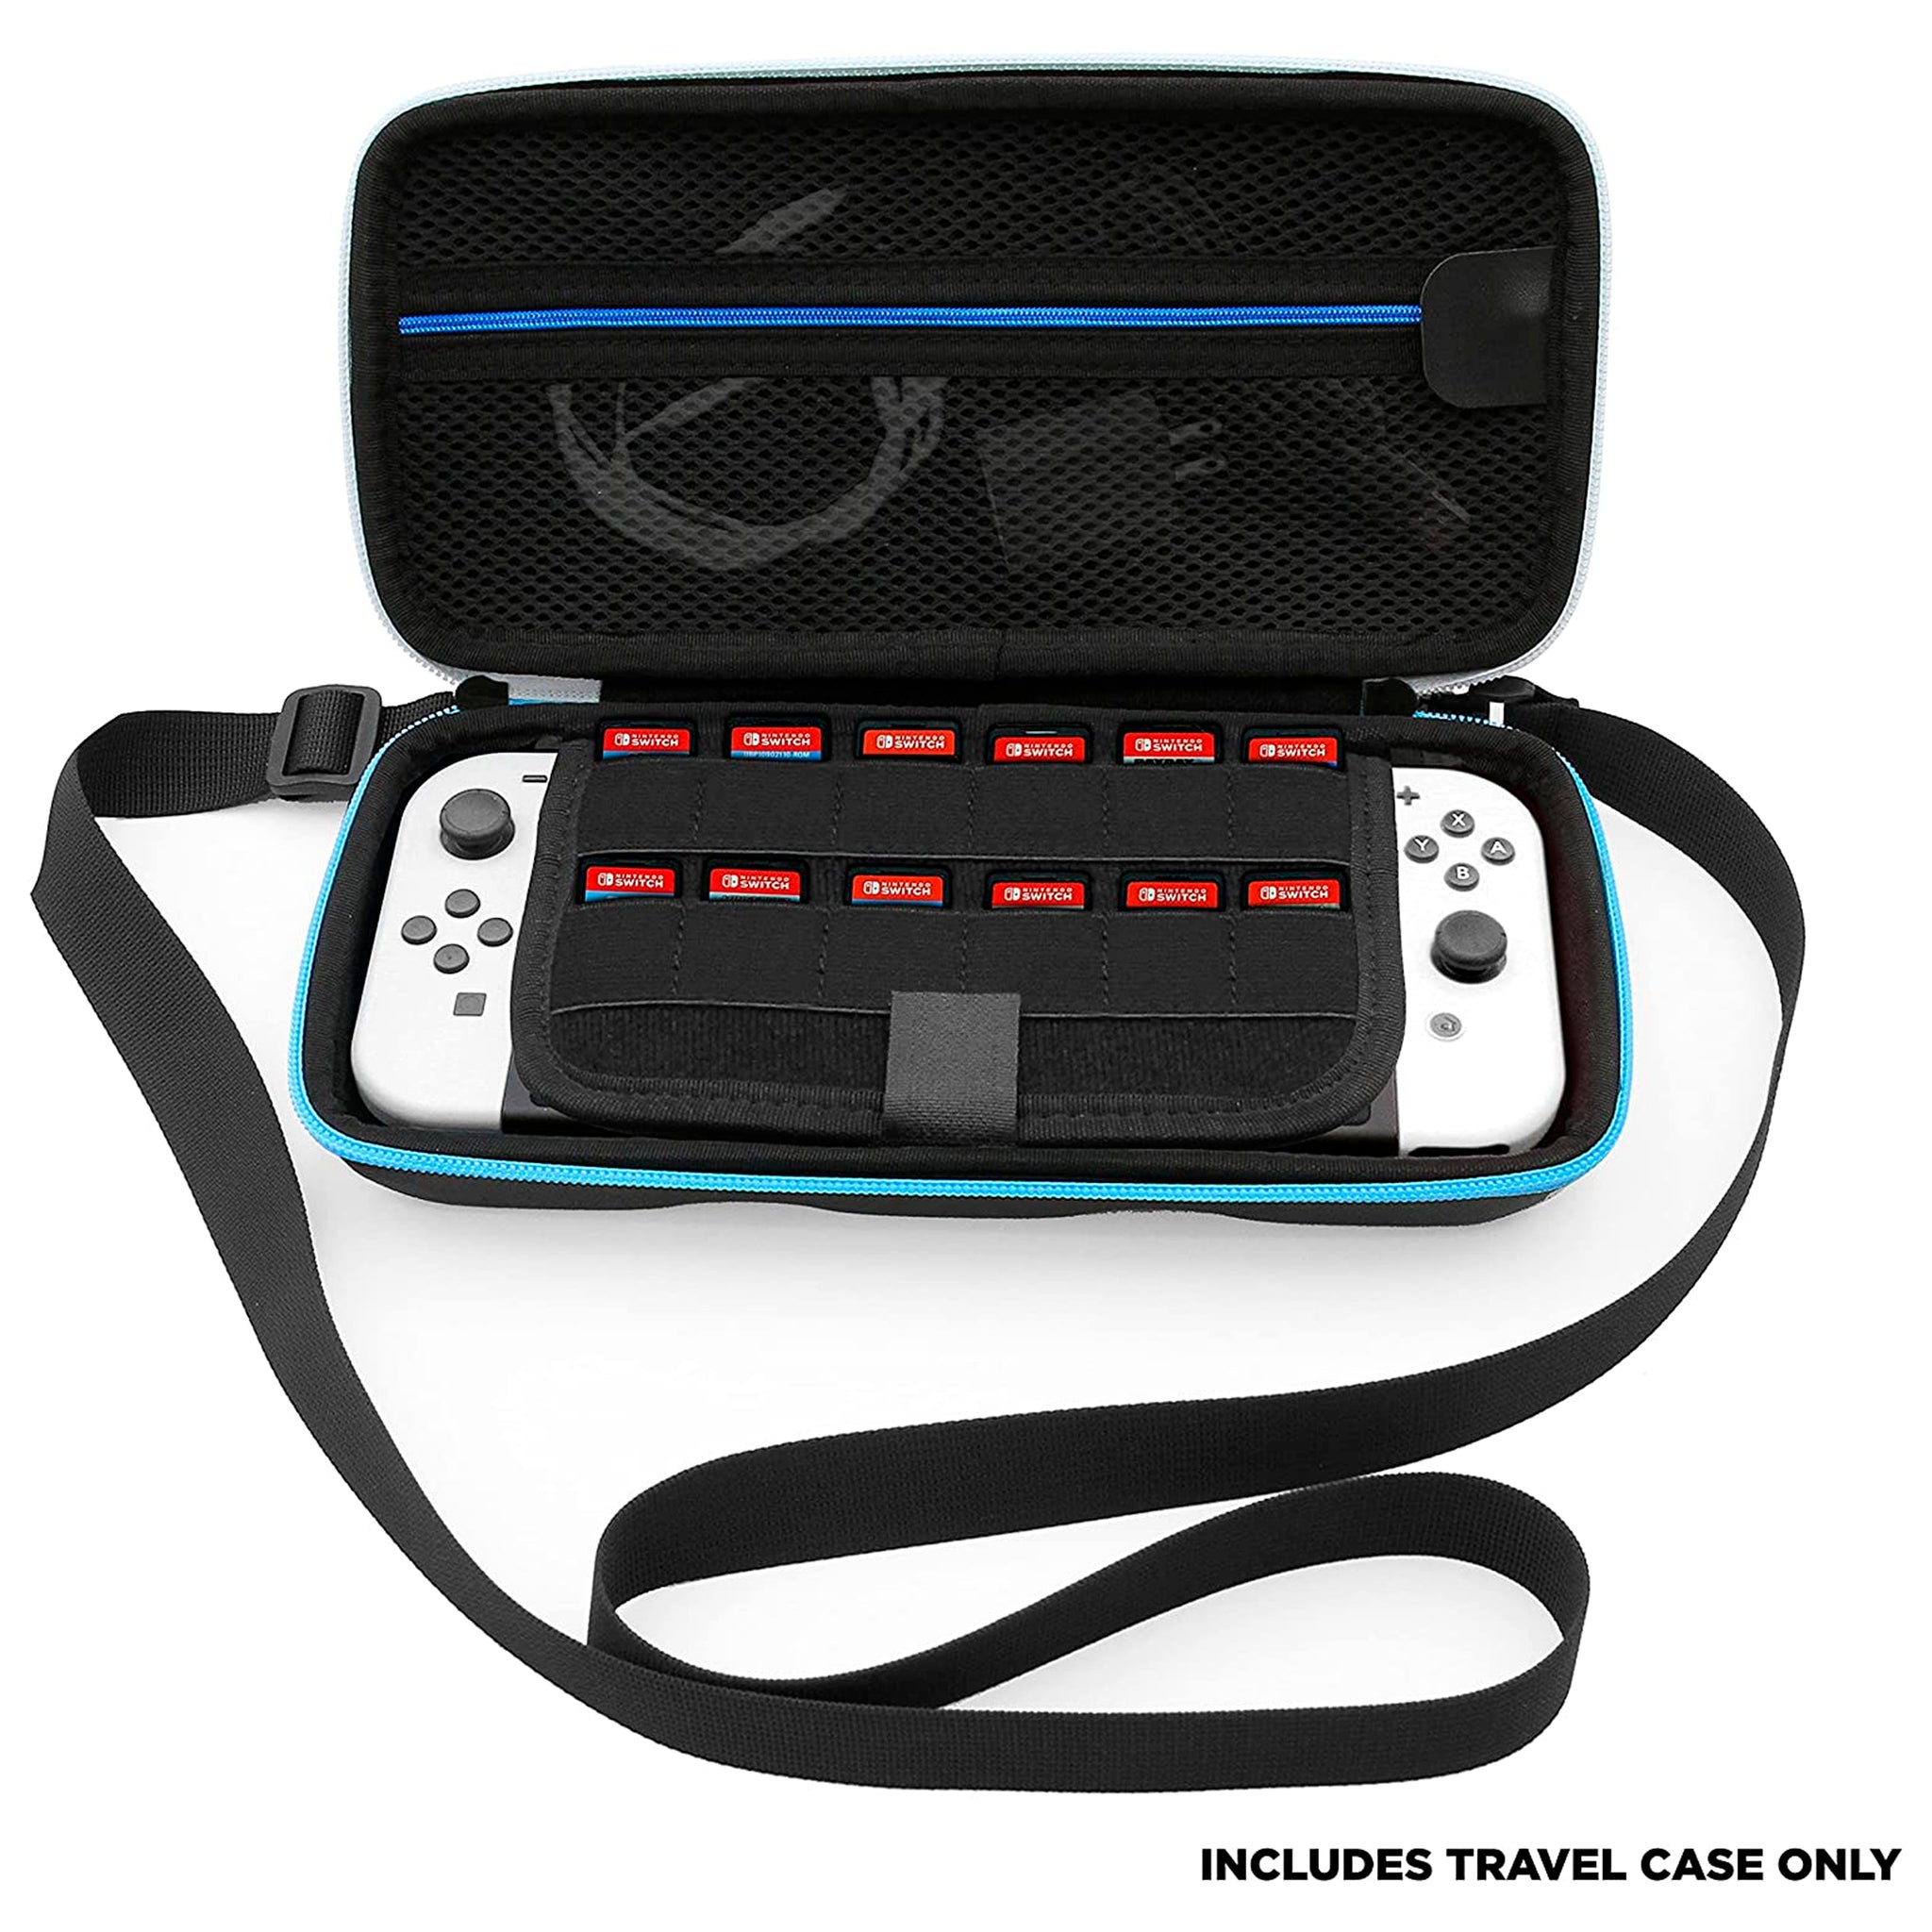 NINTENDO NINTENDO Switch Oled Carrying Case And Screen Protector